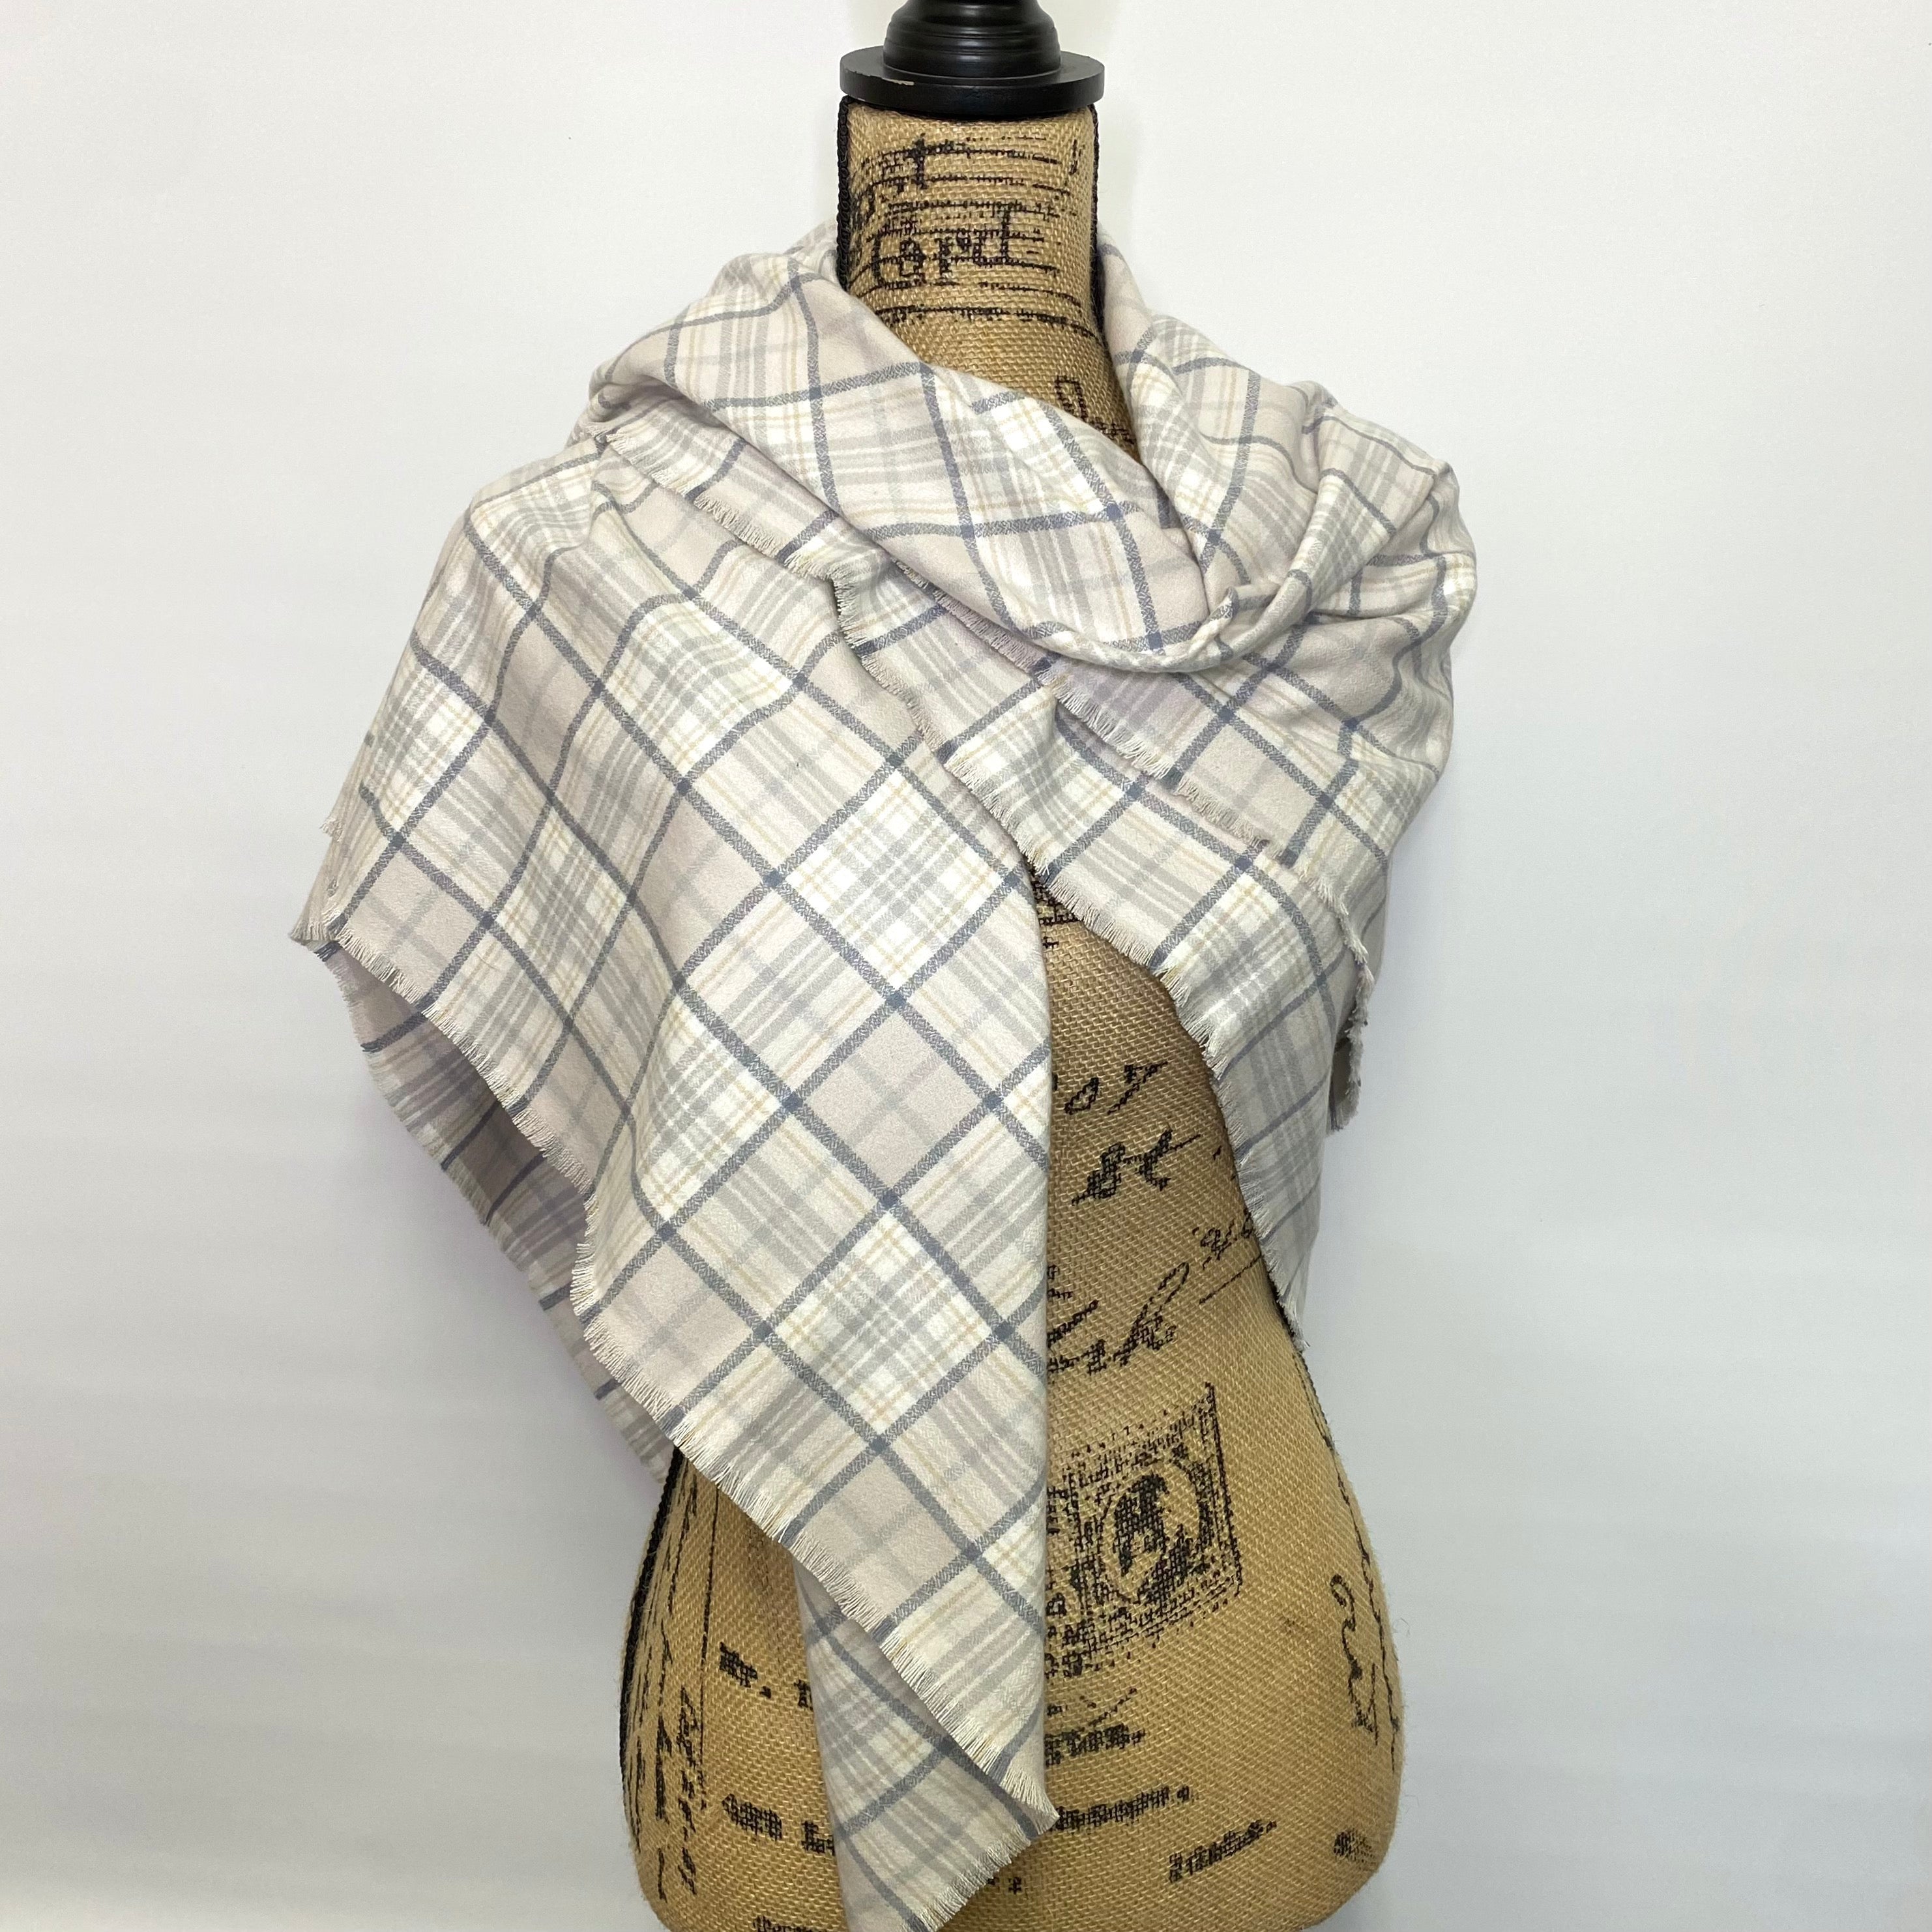 100% Organic Cotton Neutral Shades of Cream, Taupe, and Gray Plaid Infinity and Blanket Scarves